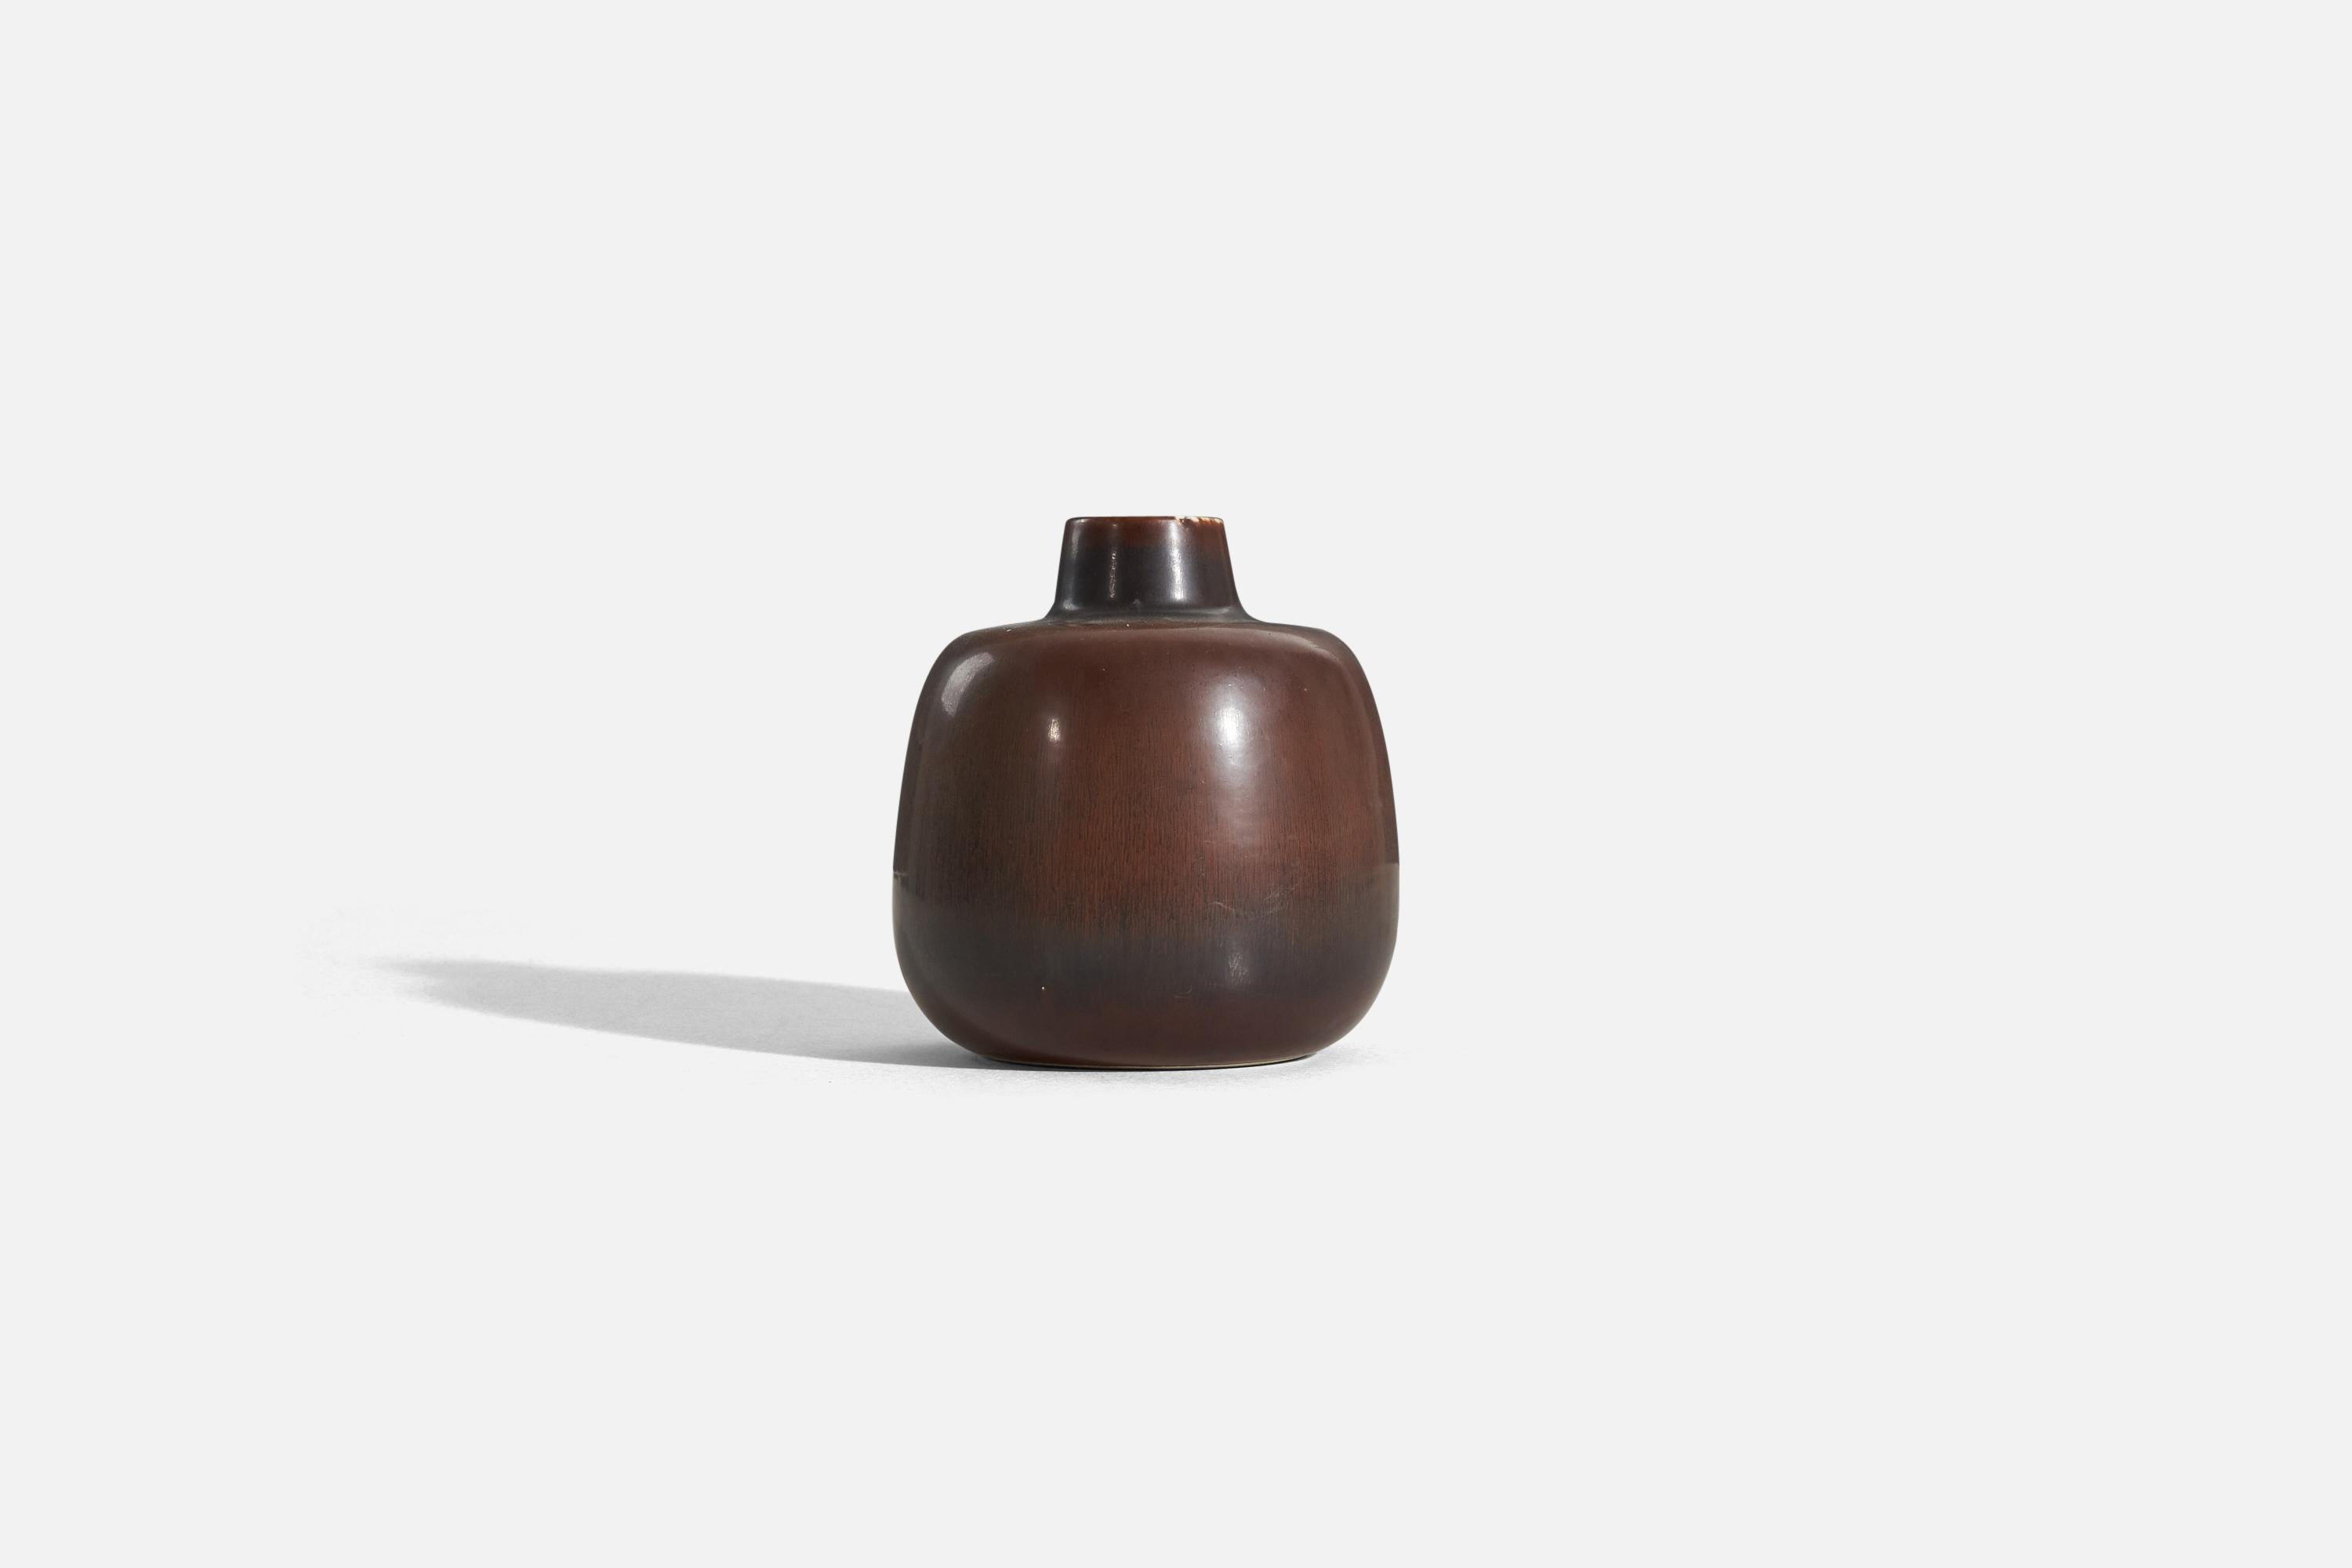 A brown glazed stoneware vase designed by Carl-Harry Stålhane and produced by Rörstrand, Sweden, 1960s.